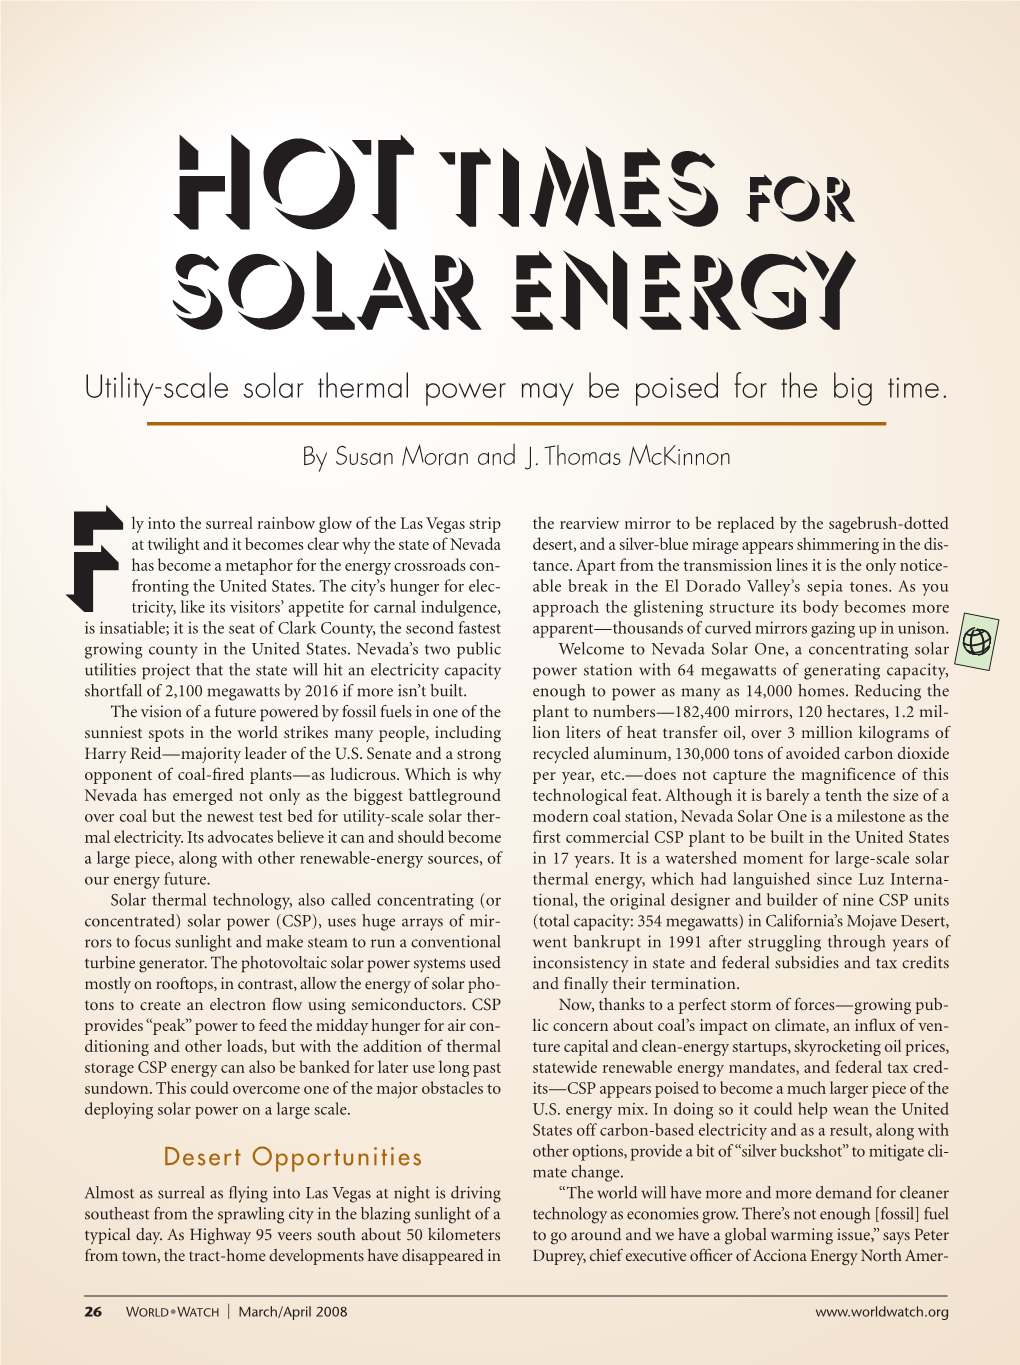 Hot Times for Solar Energy